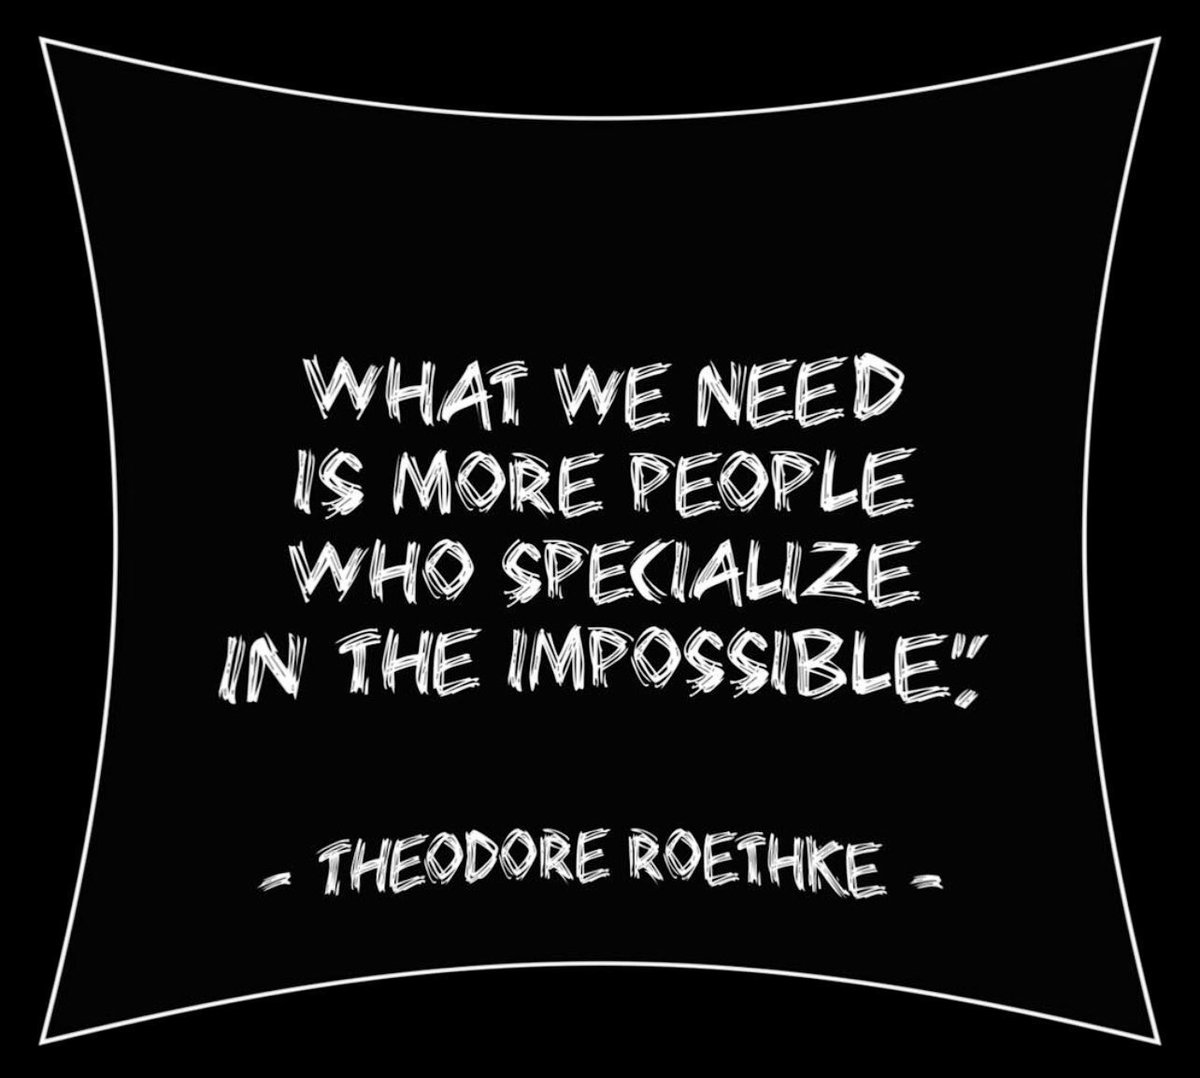 What we need is more people who specialize in the impossible. — Theodore Roethke #FridayMotivation #SuccessTRAIN #quote via #FF_Specialツ 👉 @elaine_perry